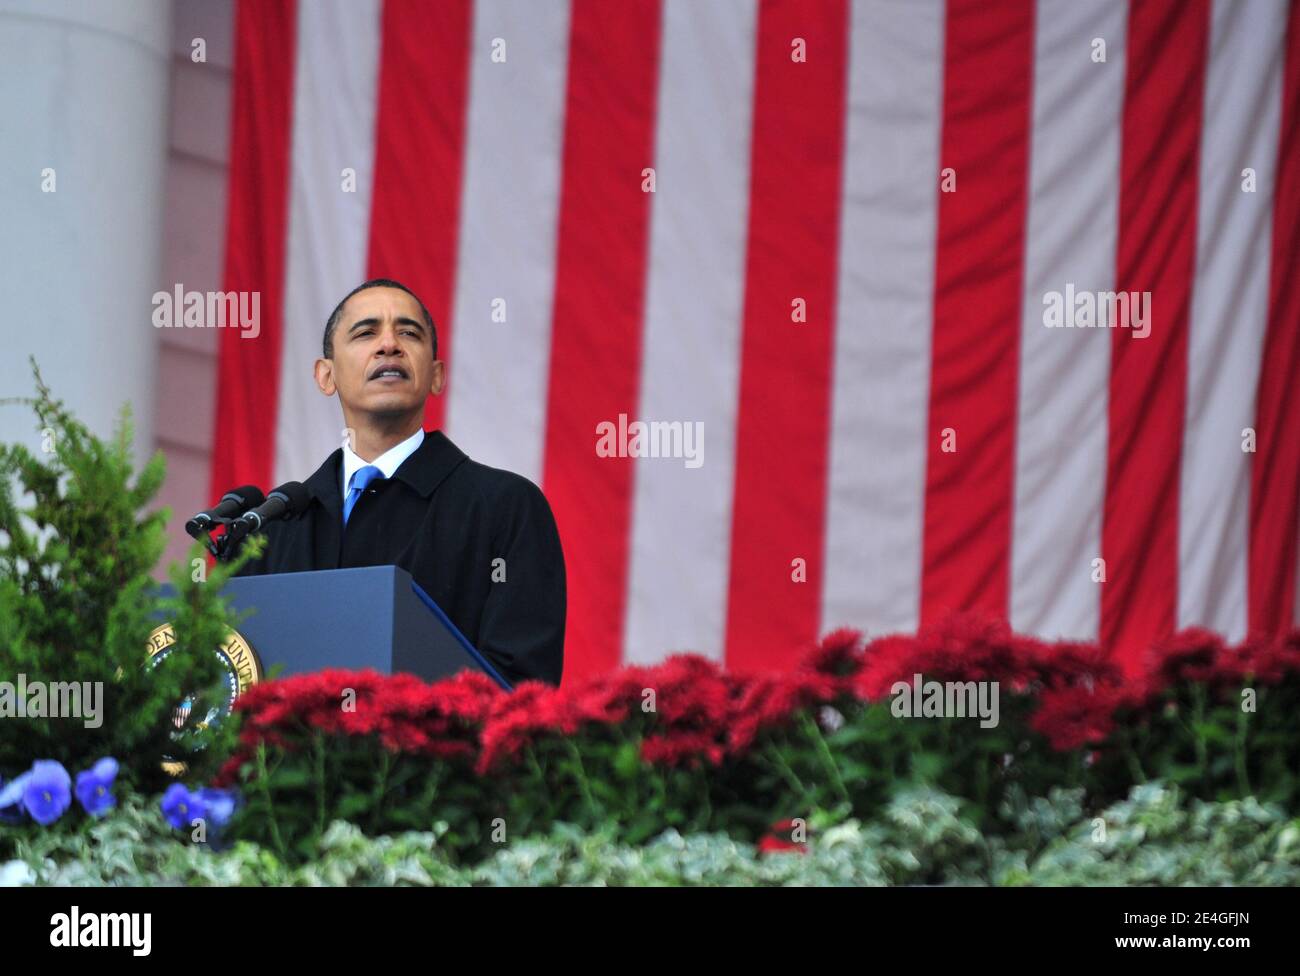 US President Barack Obama delivers remarks at a Veterans Day ceremony at Arlington National Cemetery, in Arlington, Virginia, USA on Veterans Day, on November 11, 2009. Photo by Kevin Dietsch/ABACAPRESS.COM Stock Photo